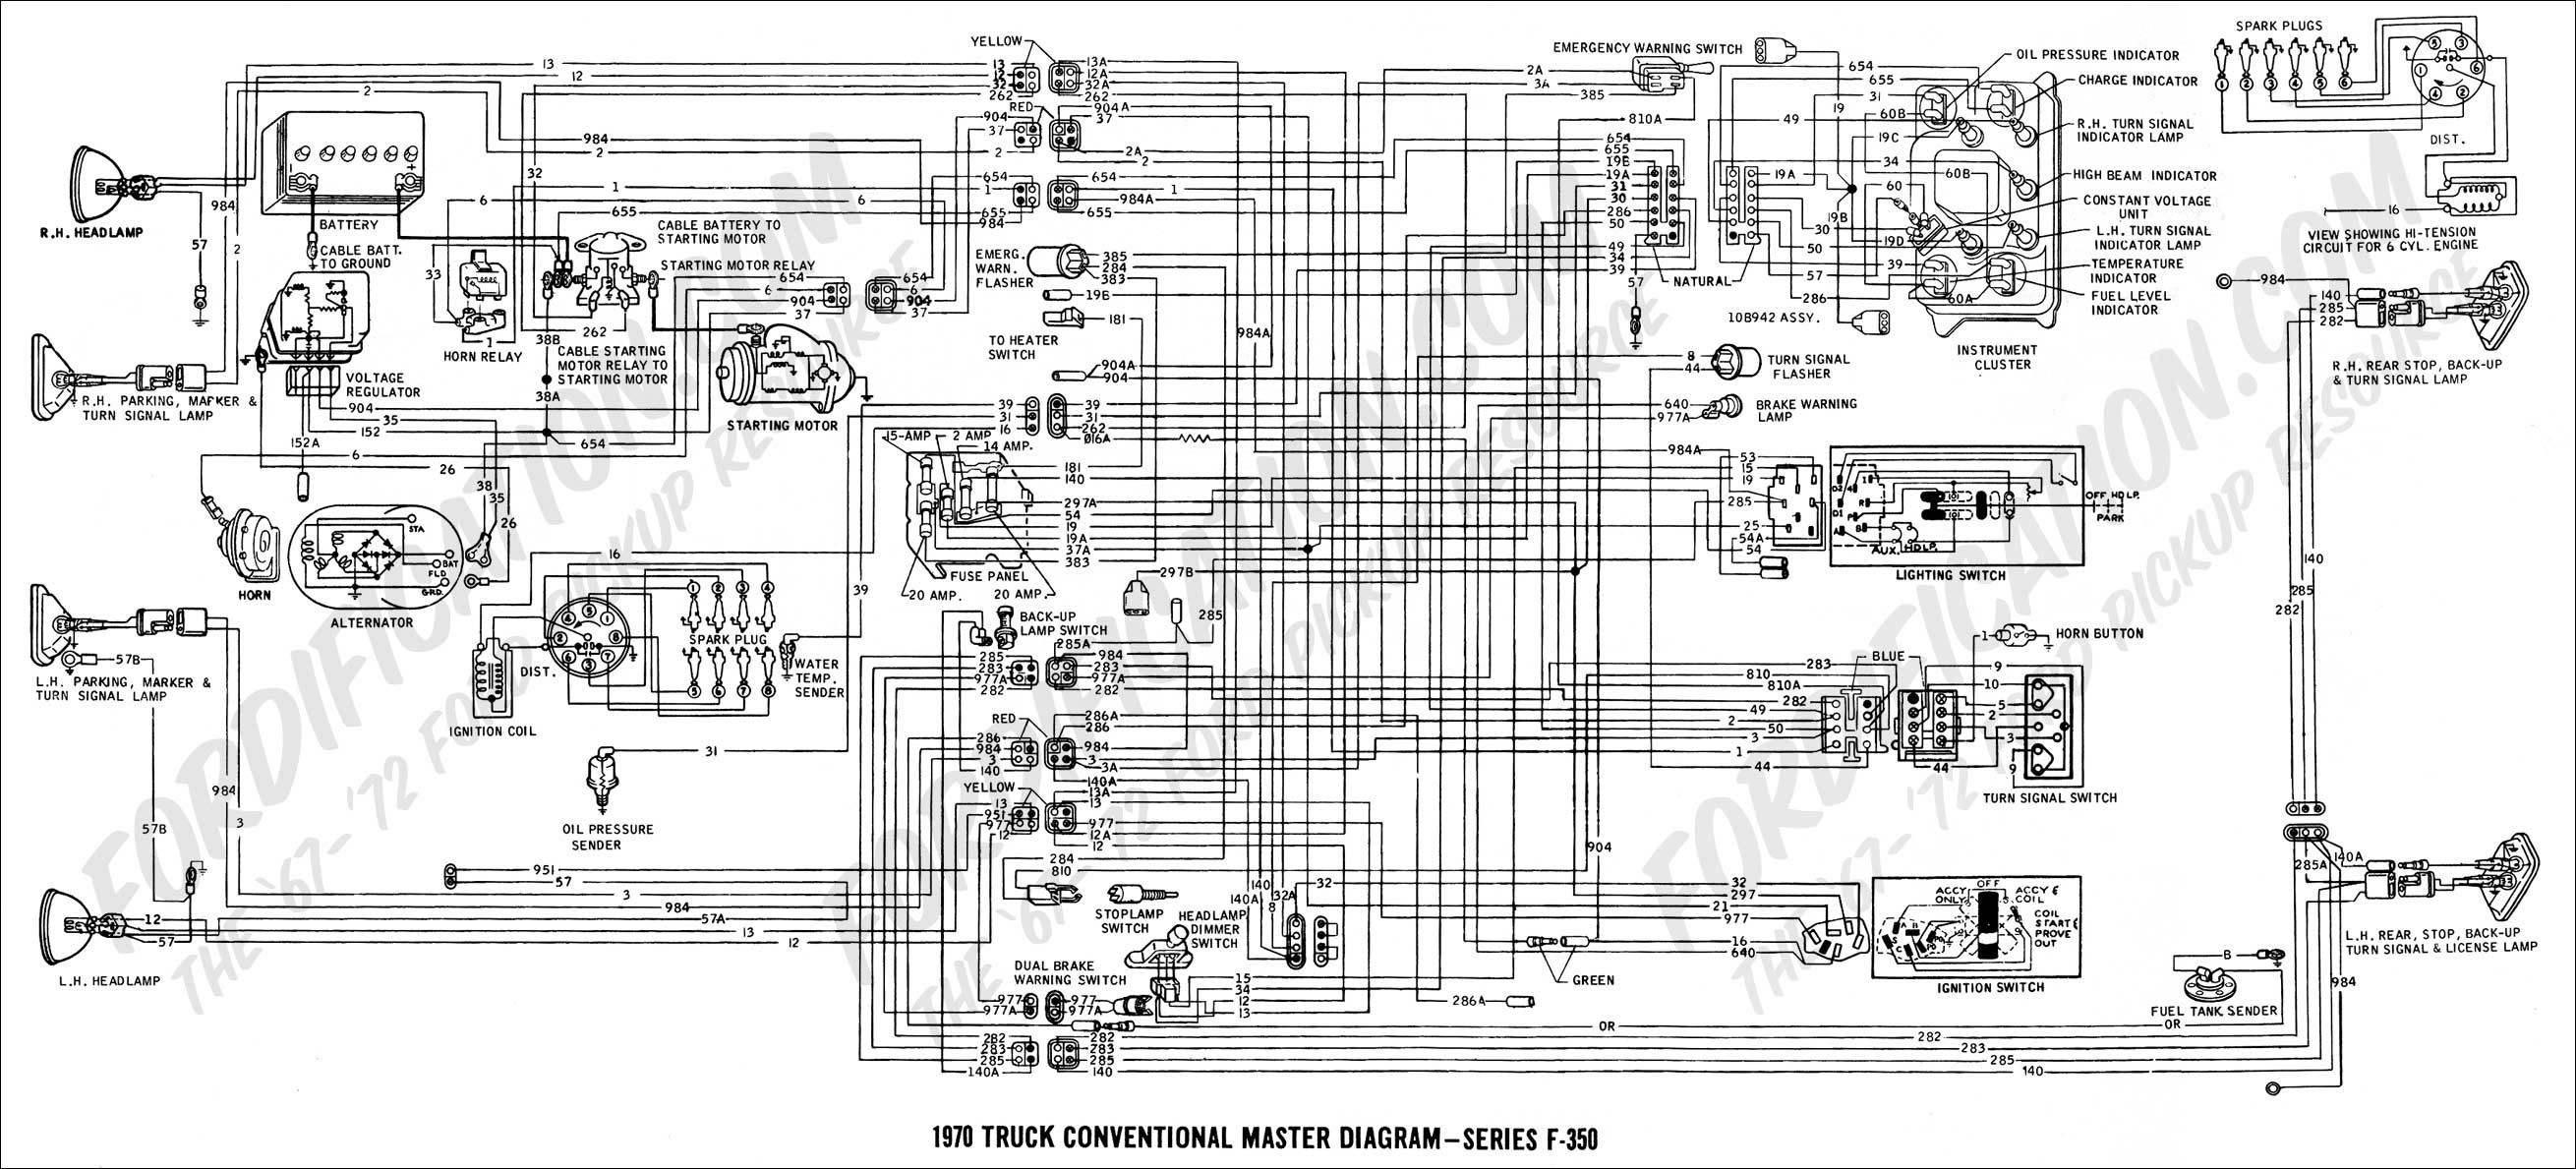 Pyromaster Fireplace New Wrg 0325] ford Wiring Diagrams Free